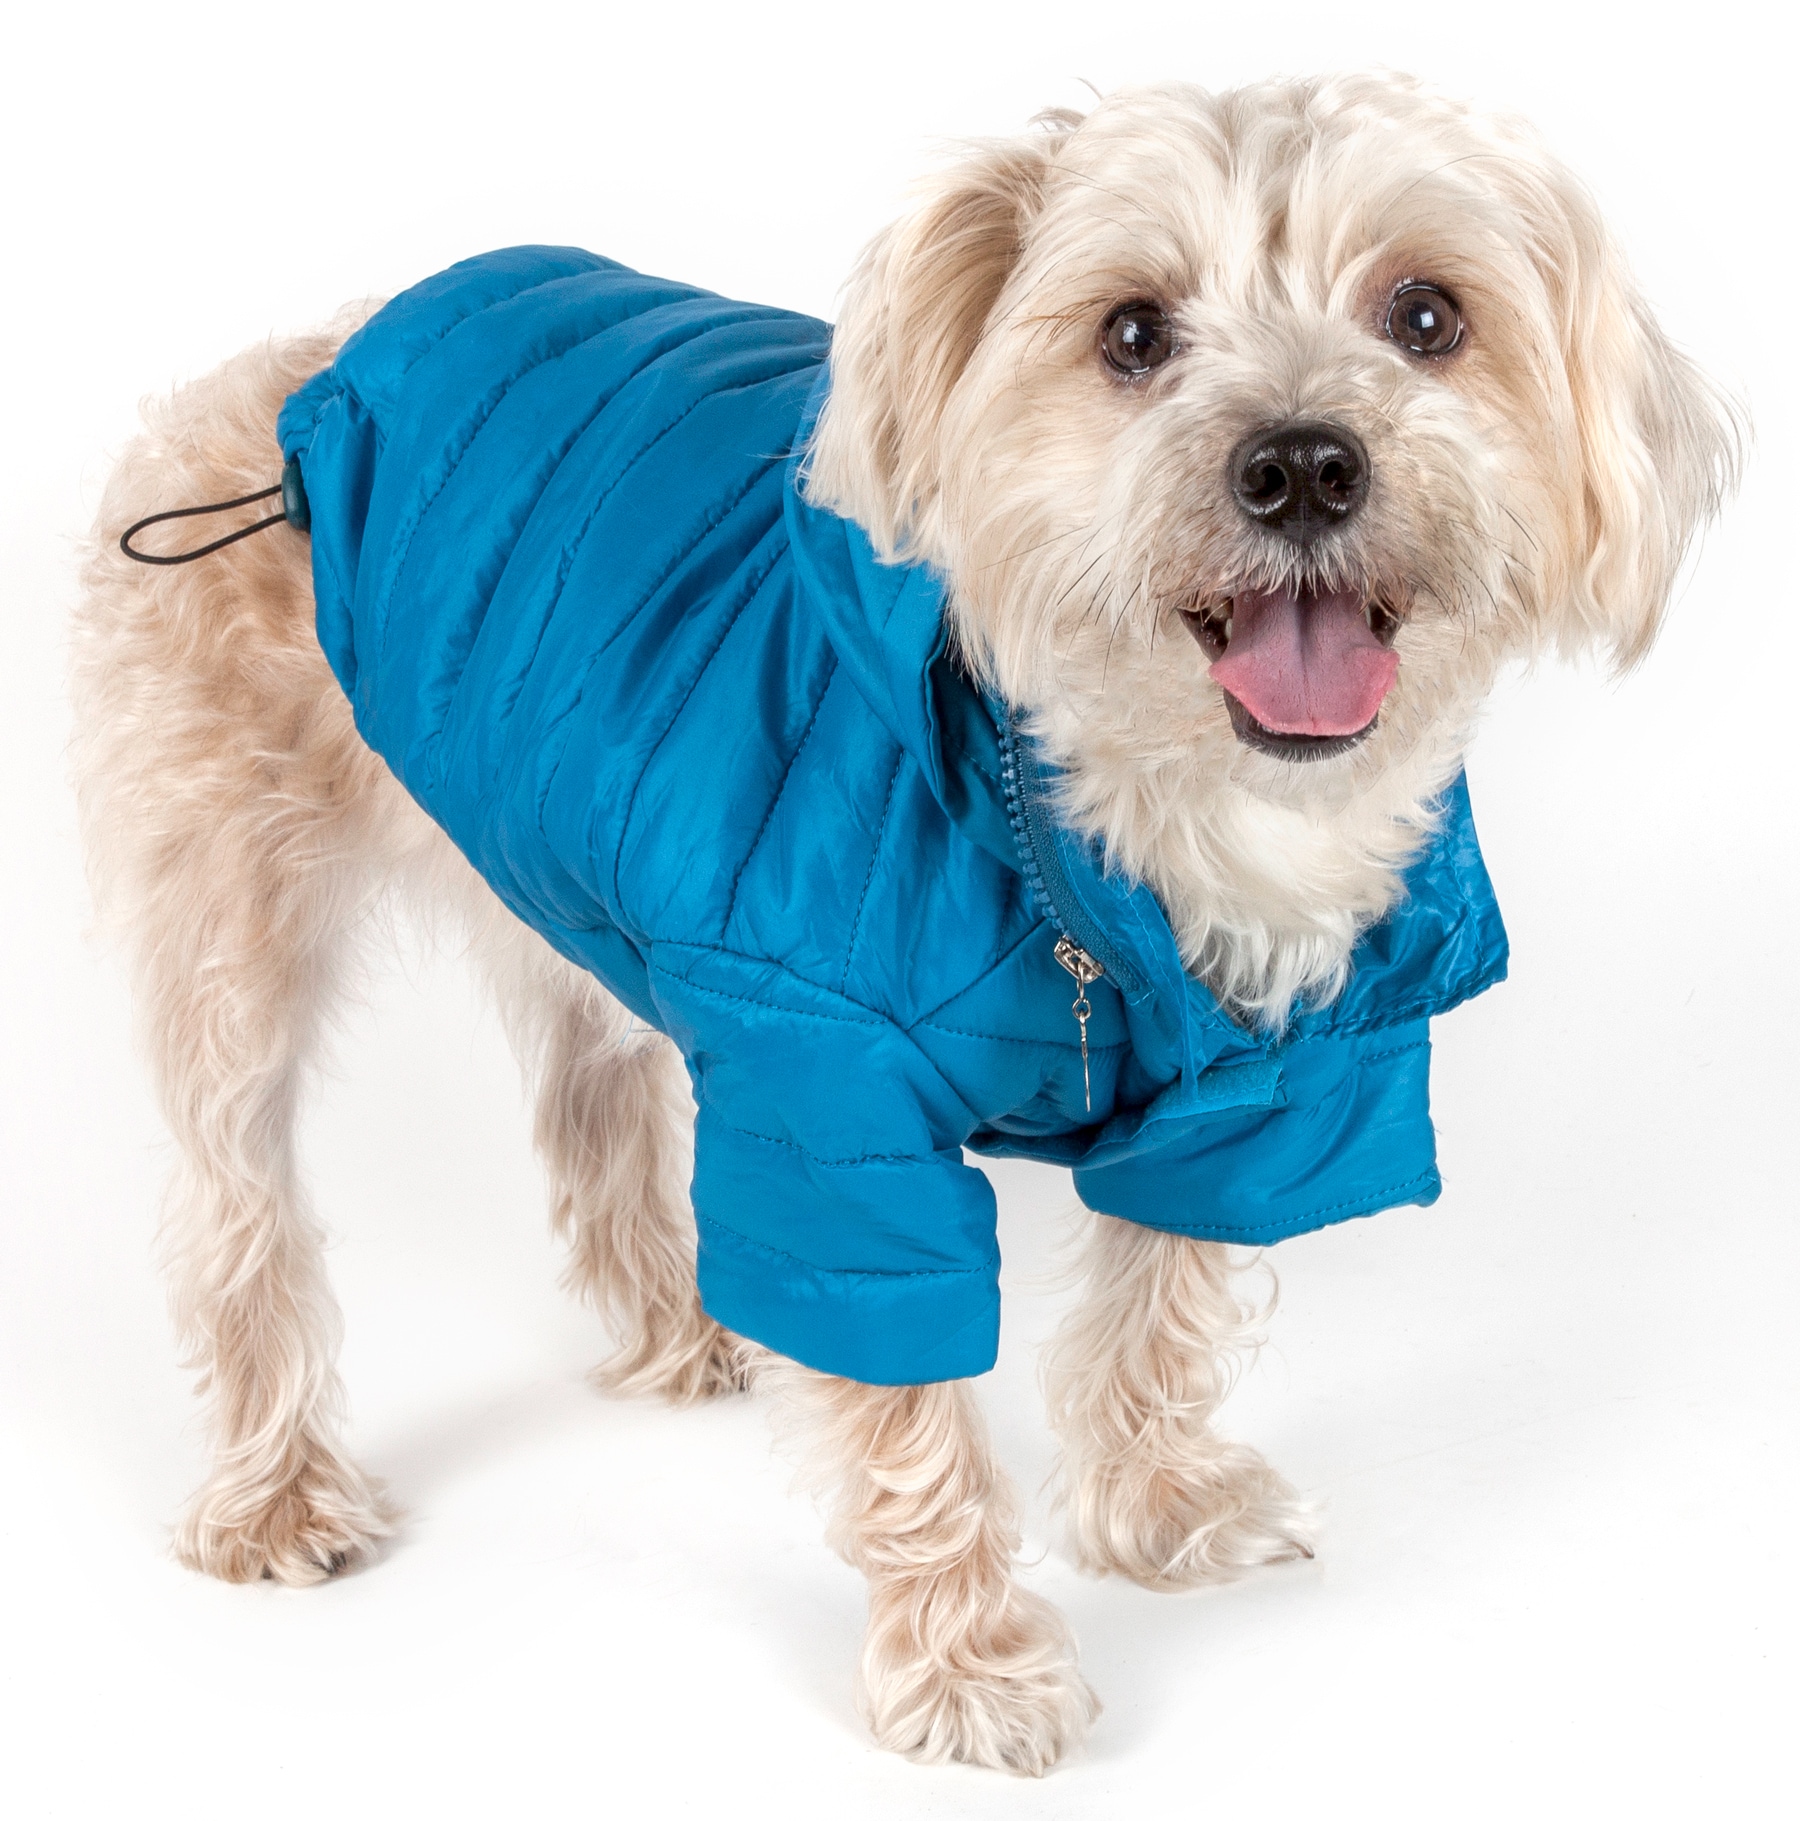 Pet Life Lightweight Adjustable 'Sporty Avalanche' Pet Coat - Blue, Medium,  Dog/Cat, Water Resistant, Machine Washable in the Pet Clothing department  at